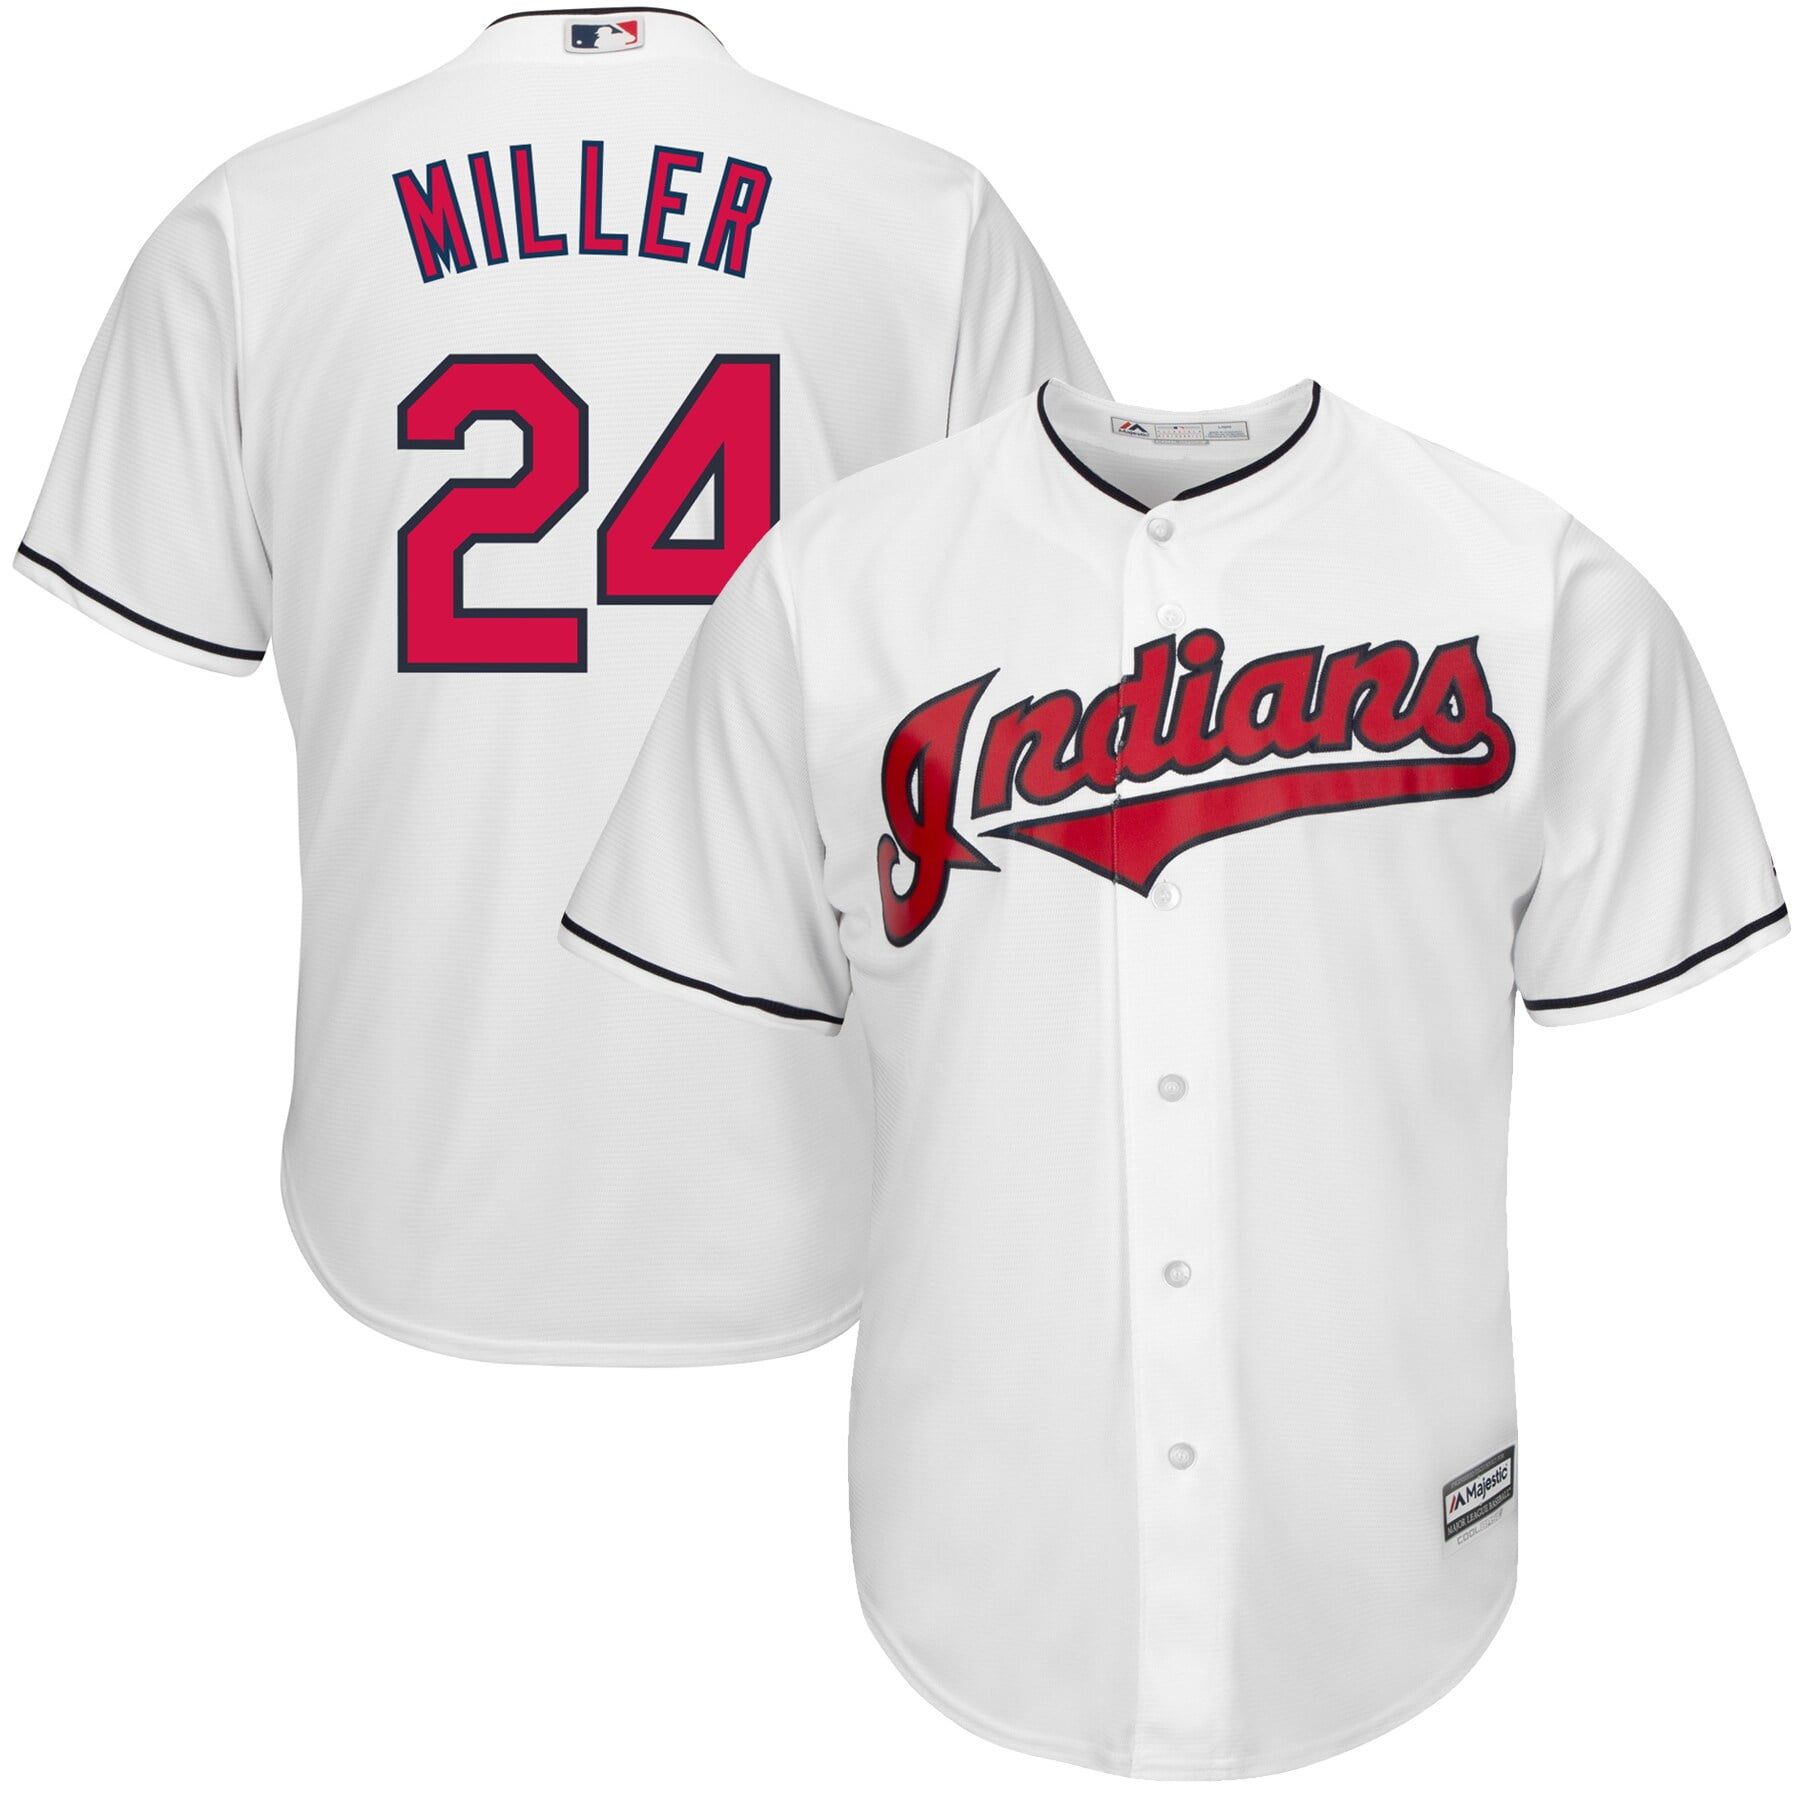 andrew miller cleveland jersey